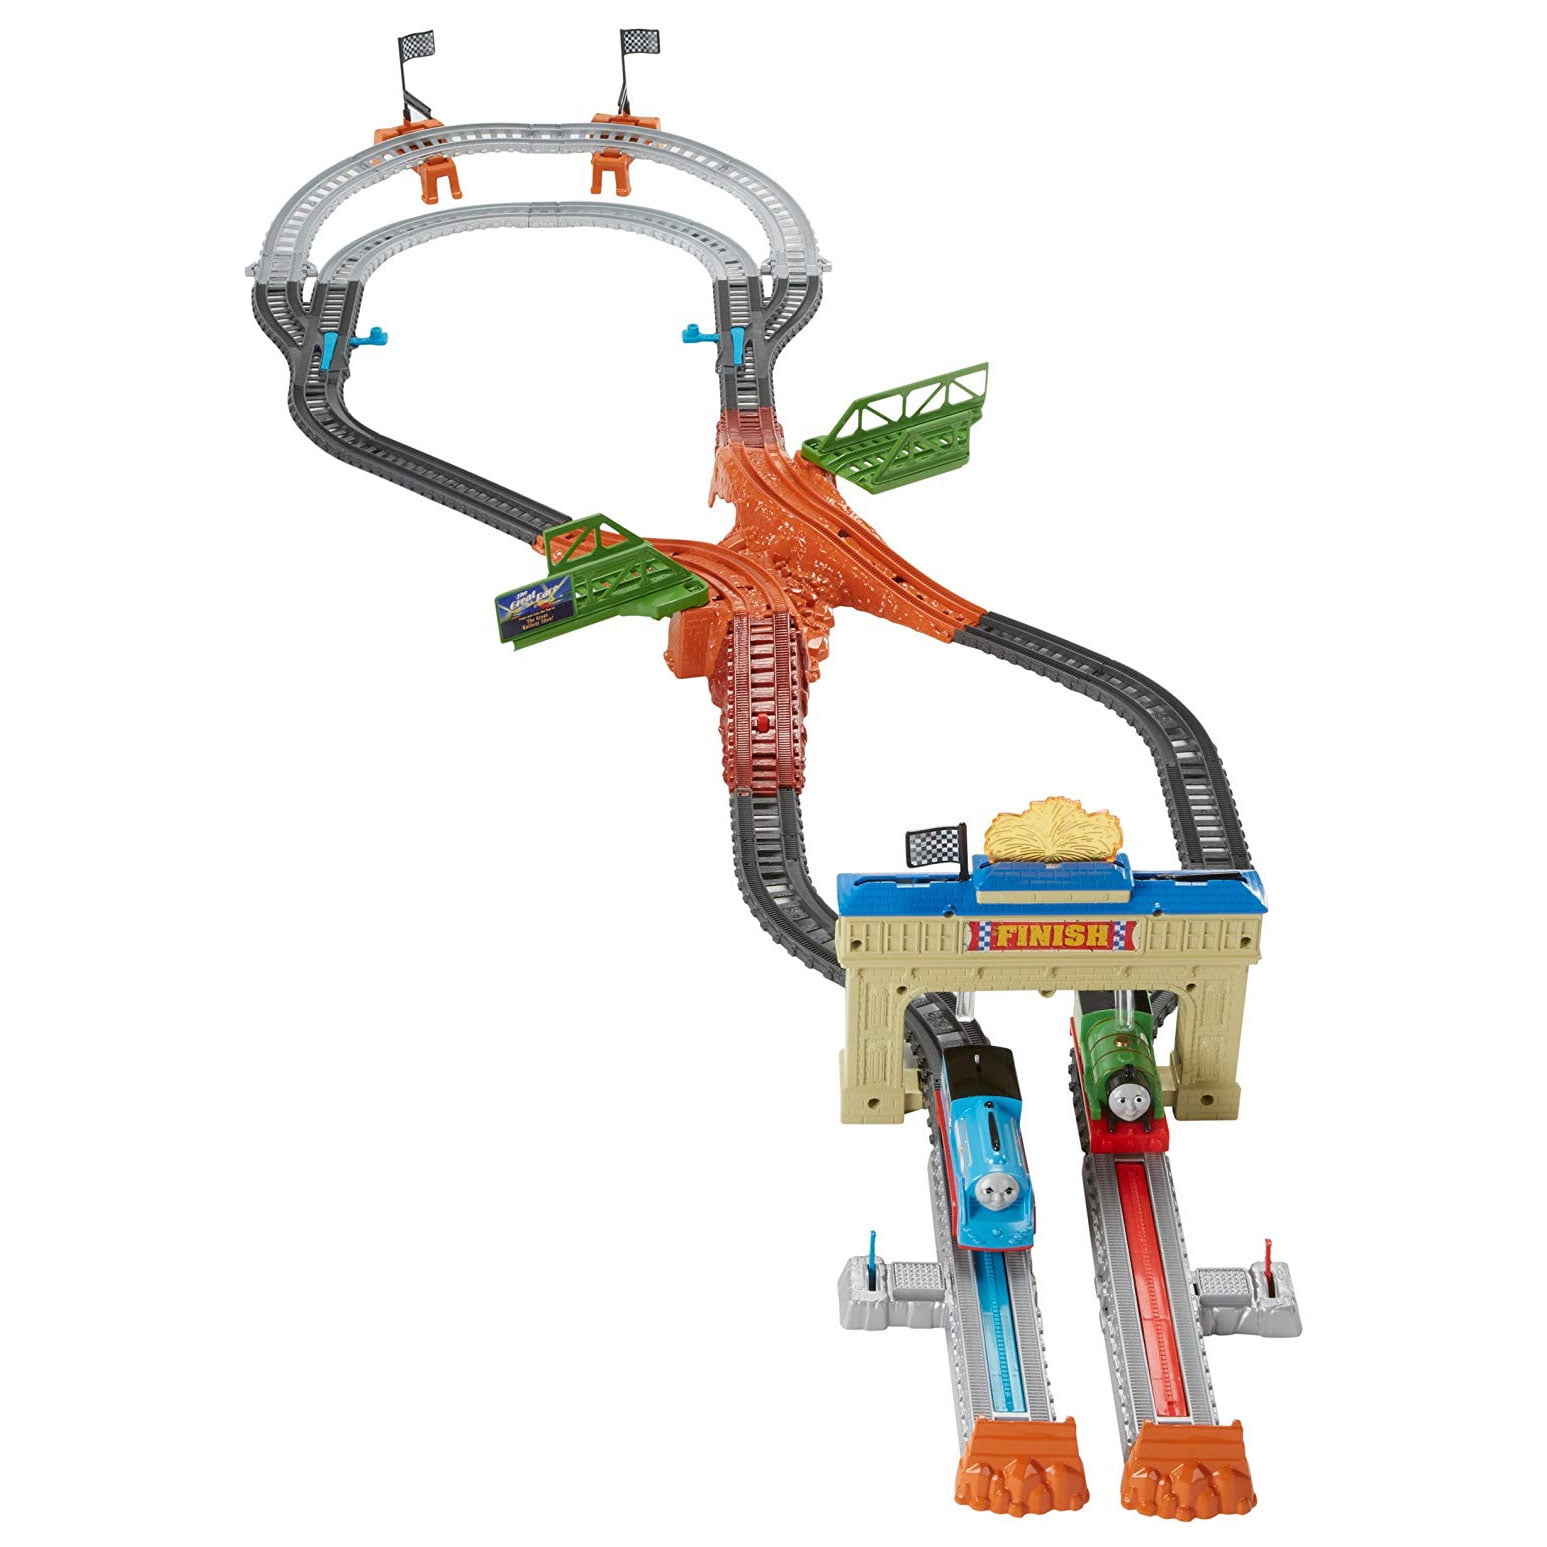 Thomas and Percy/'s Railway Race Set Thomas and Friends TrackMaster